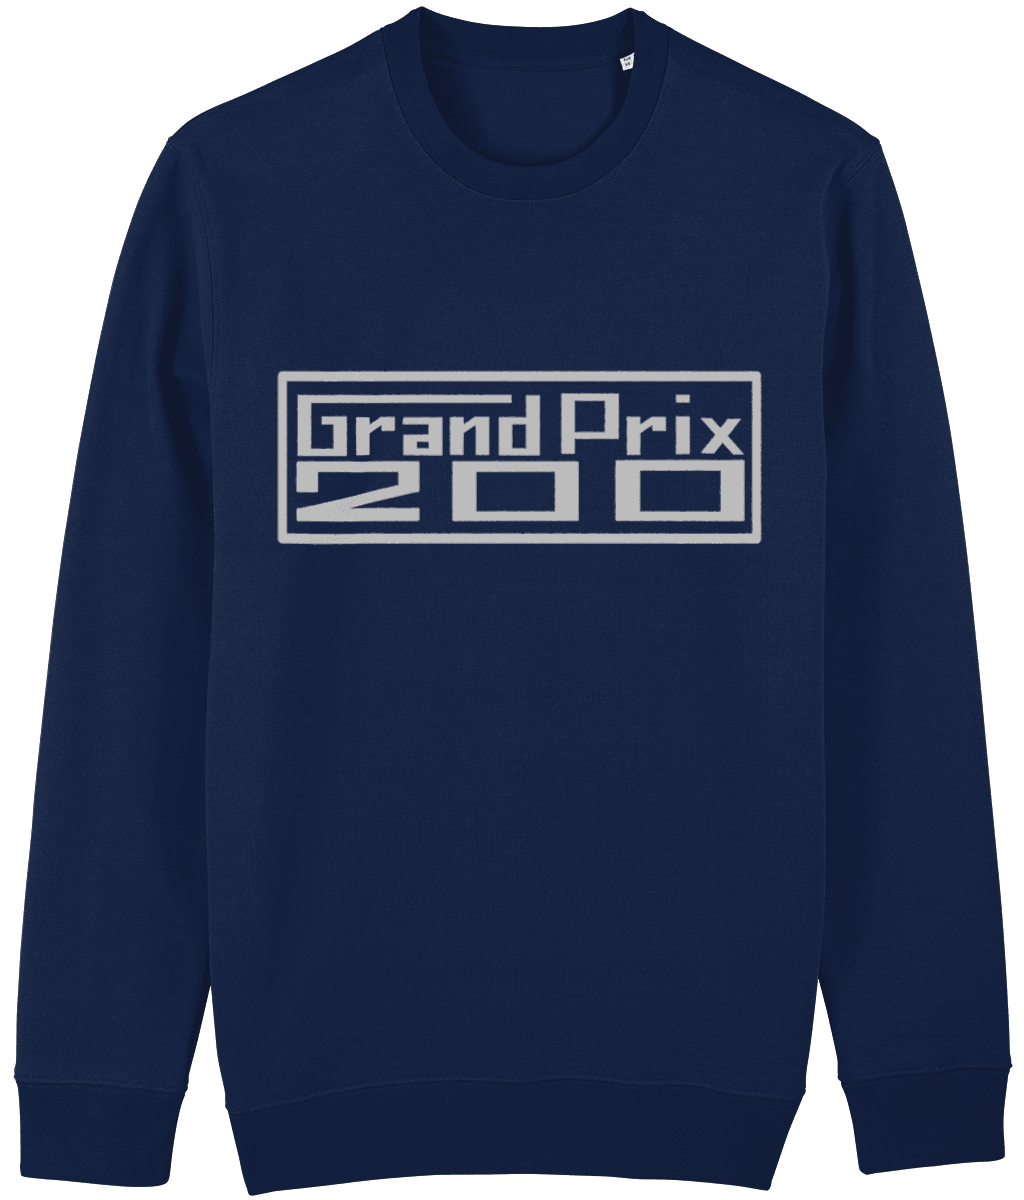 GRAND PRIX 200: Swaetahirt Inspired by Classic Lambretta Scooters (Silver Badge) - SOUND IS COLOUR